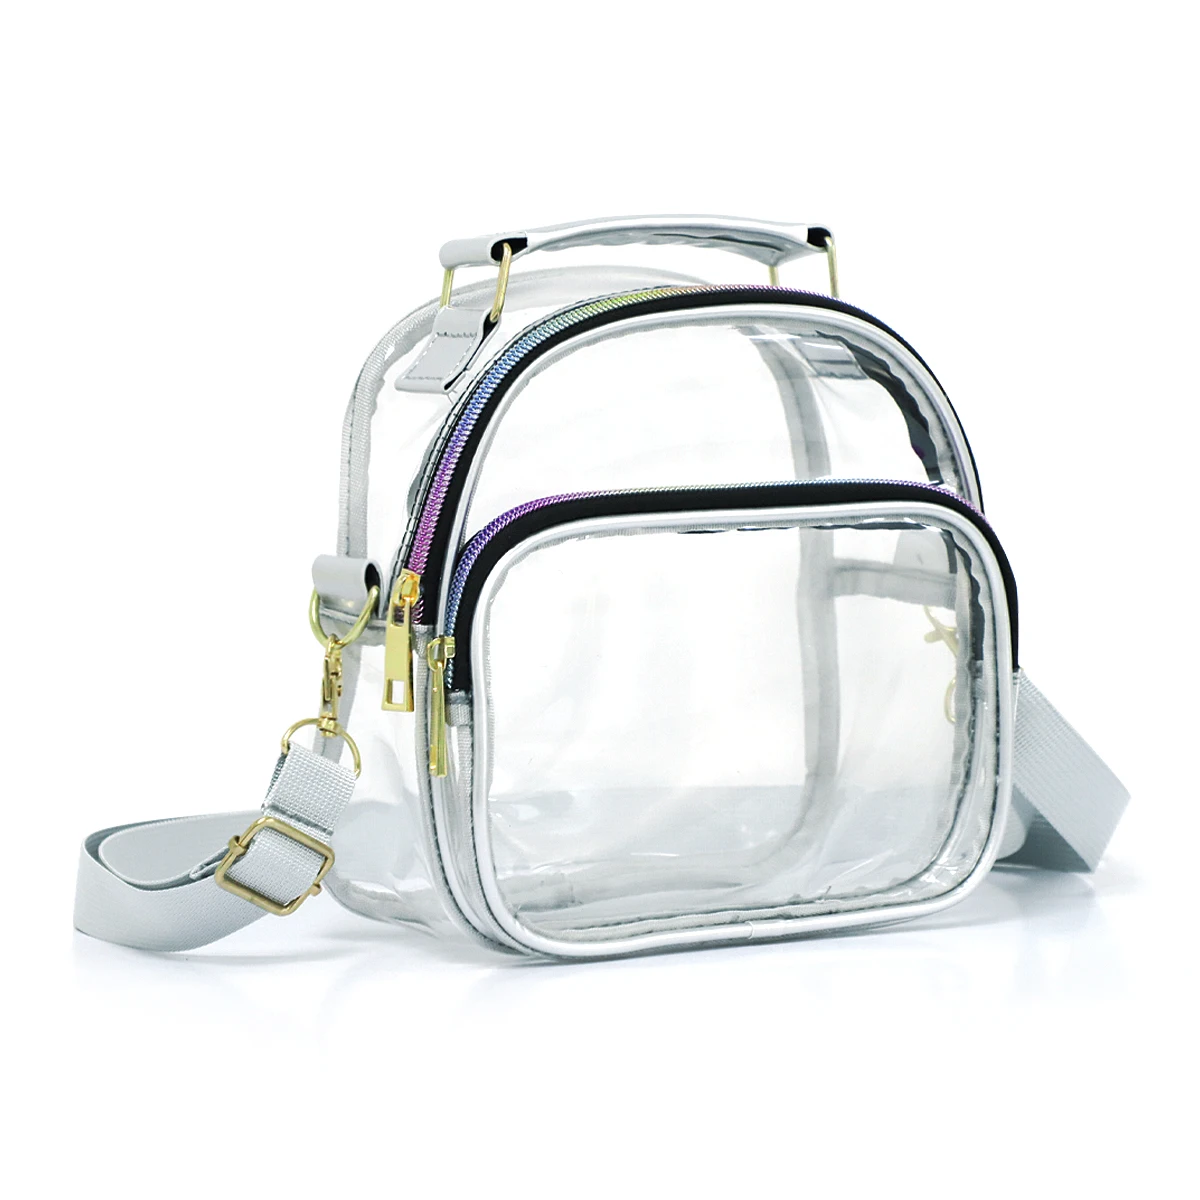 

Clear Purse for Women Clear Bag Stadium Approved See Through Transparent Handbag with Front Pocket